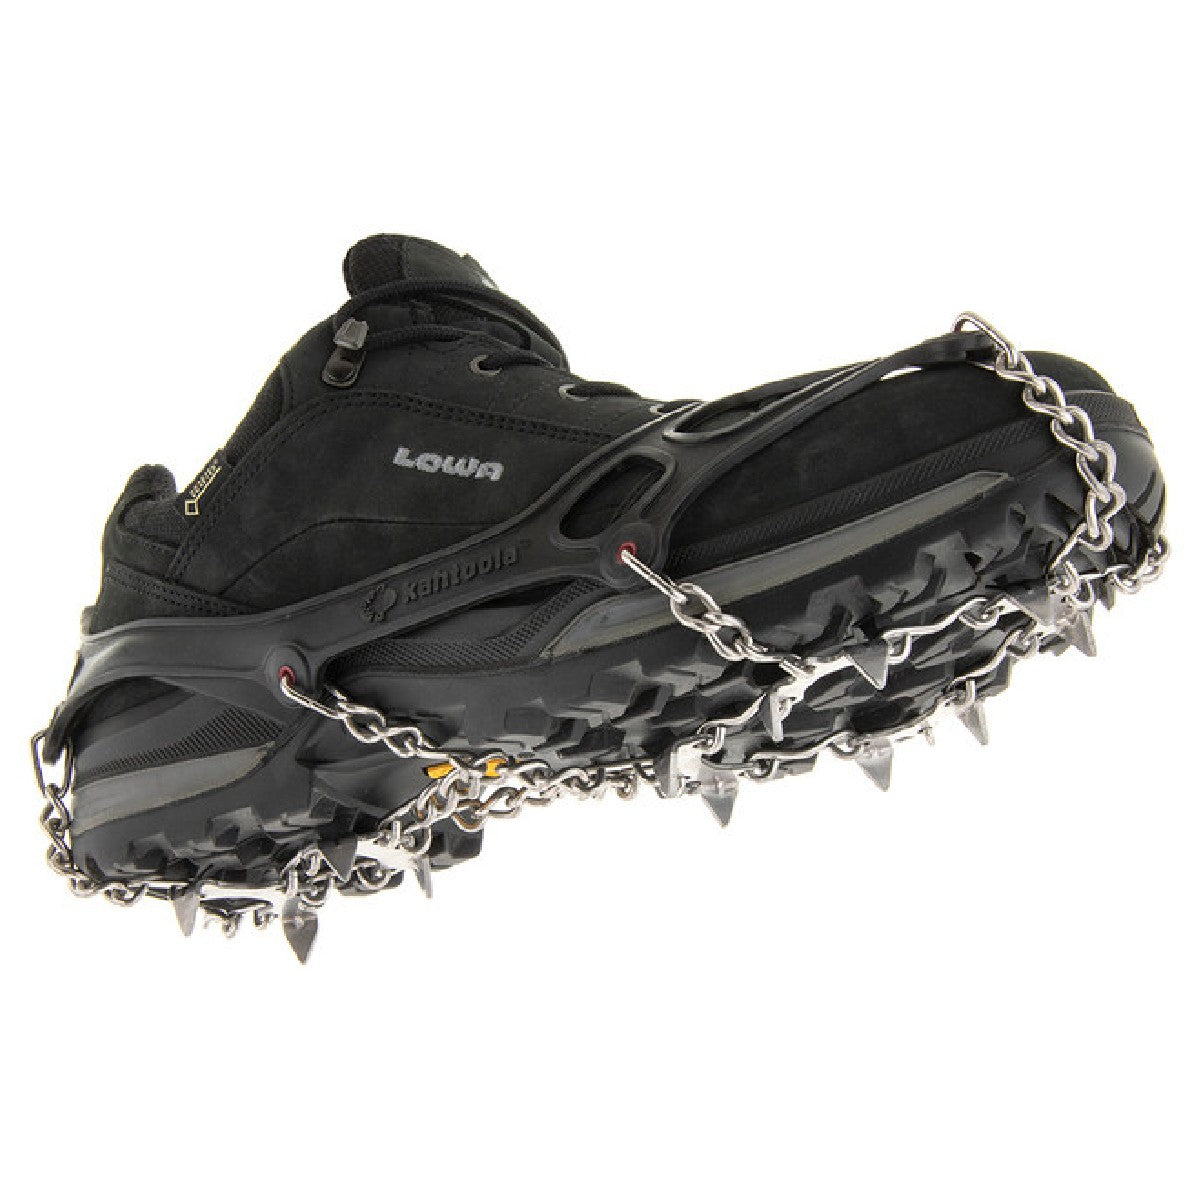 Spikes and Crampons